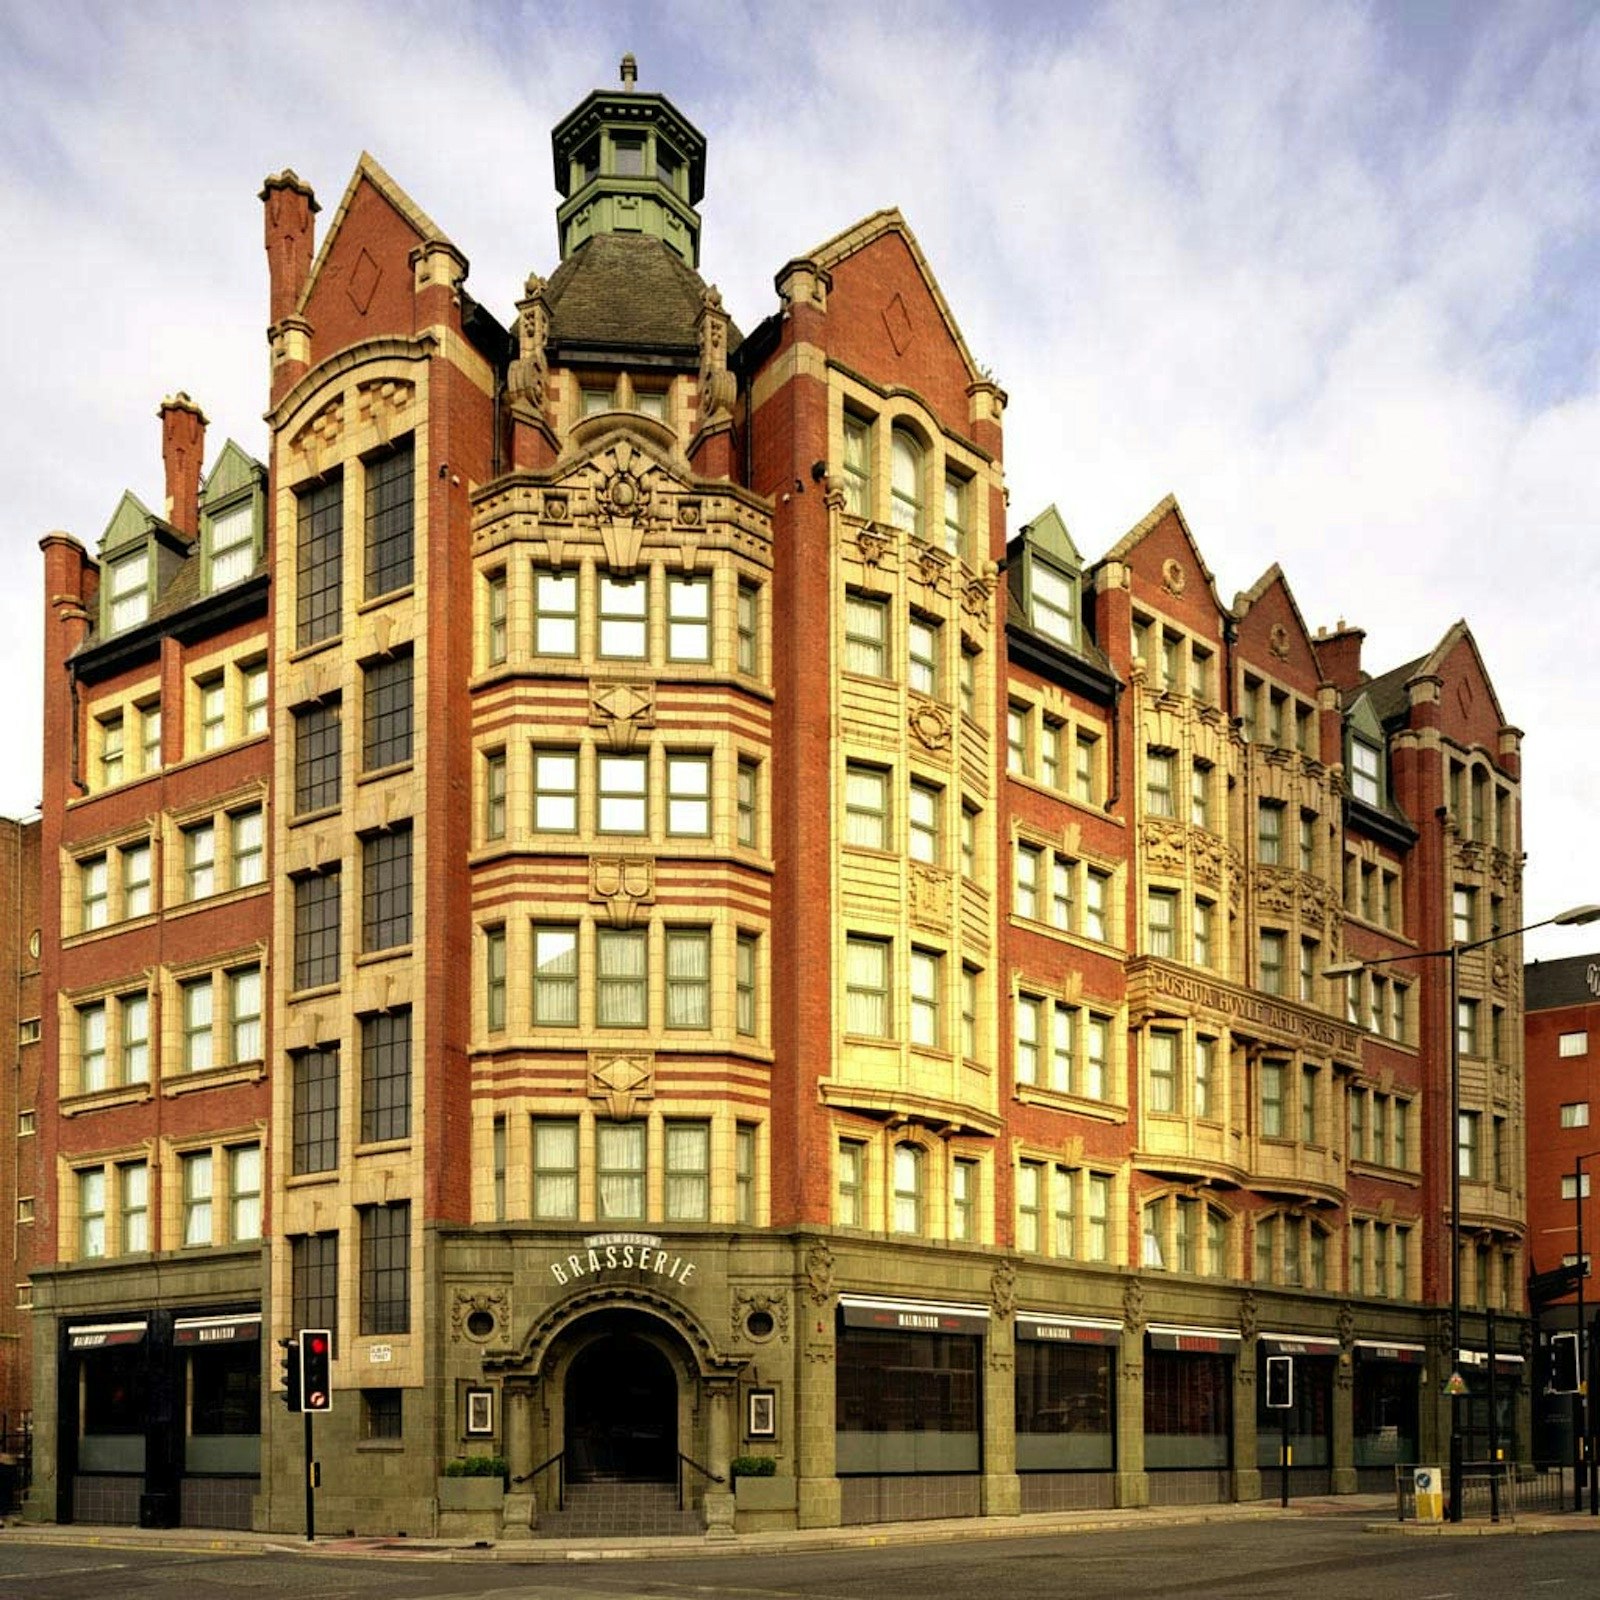 Meeting Rooms Venues in Salford - Malmaison, Manchester